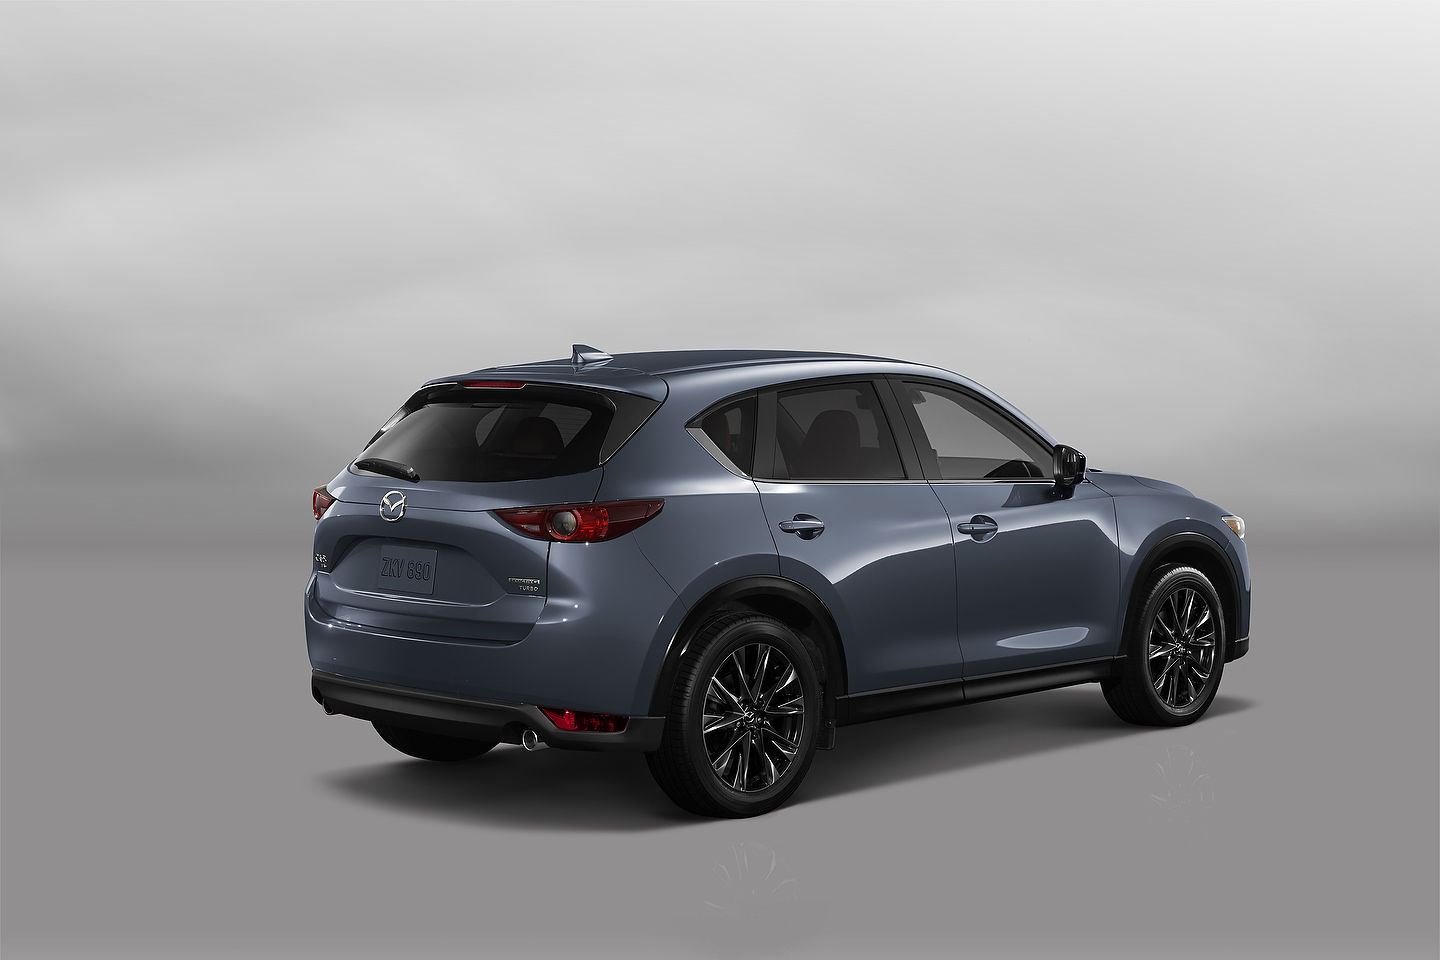 2021 Mazda CX-5 vs. 2021 Nissan Rogue: When You Want More Out of Your SUV